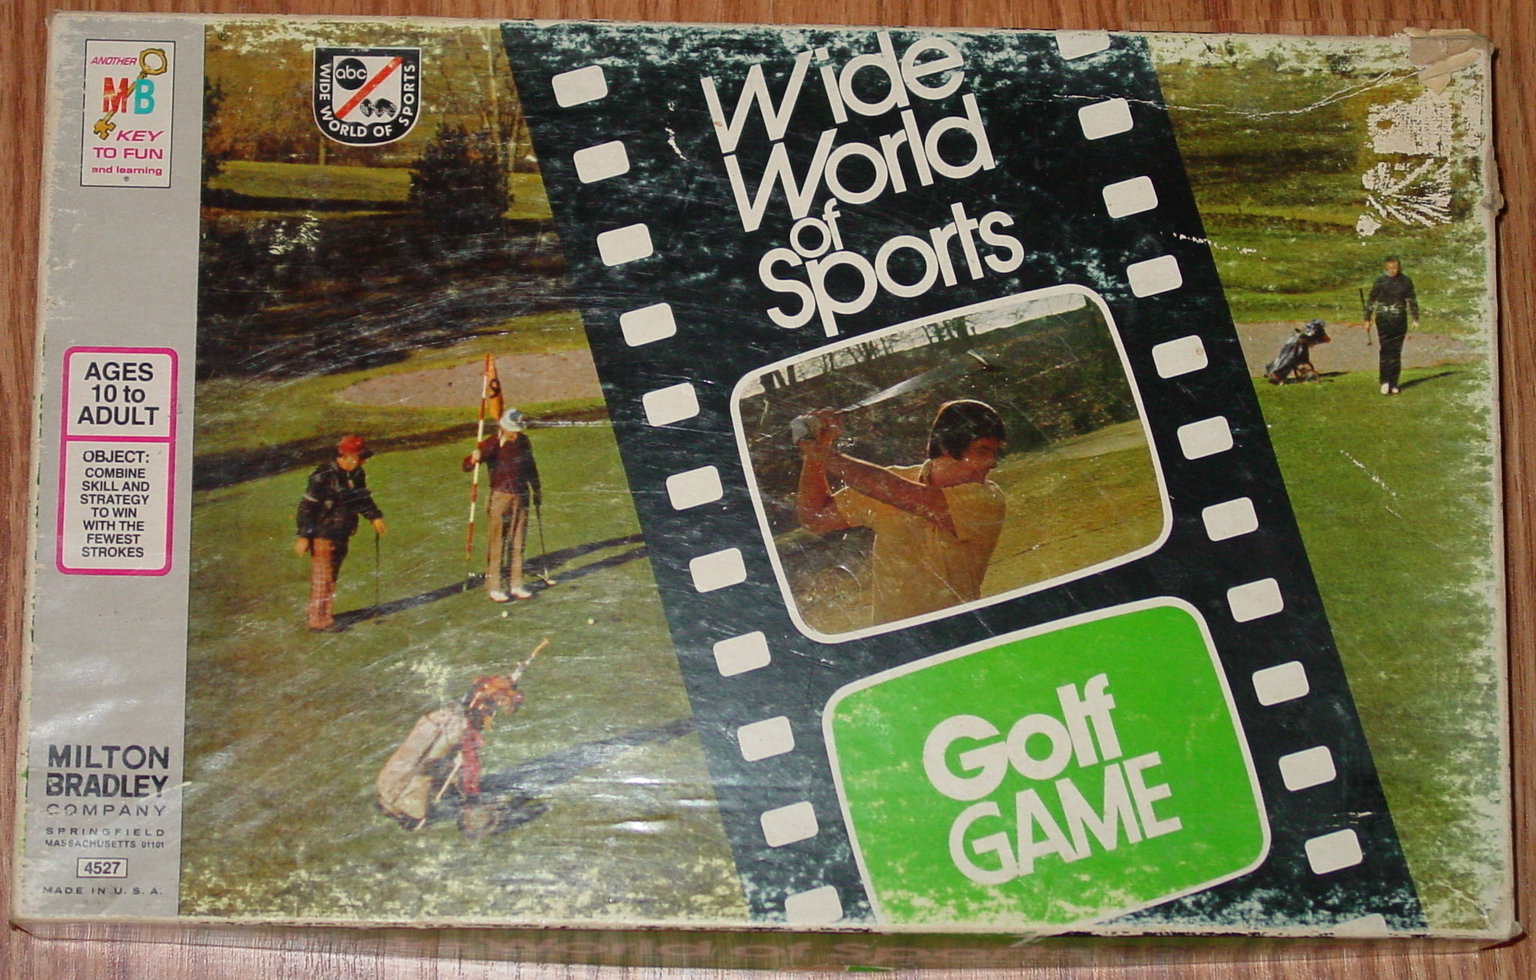 WIDE WORLD OF SPORTS GOLF GAME 1975 MILTON BRADLEY COMPLETE CONTENTS EXCELLENT - $5.00